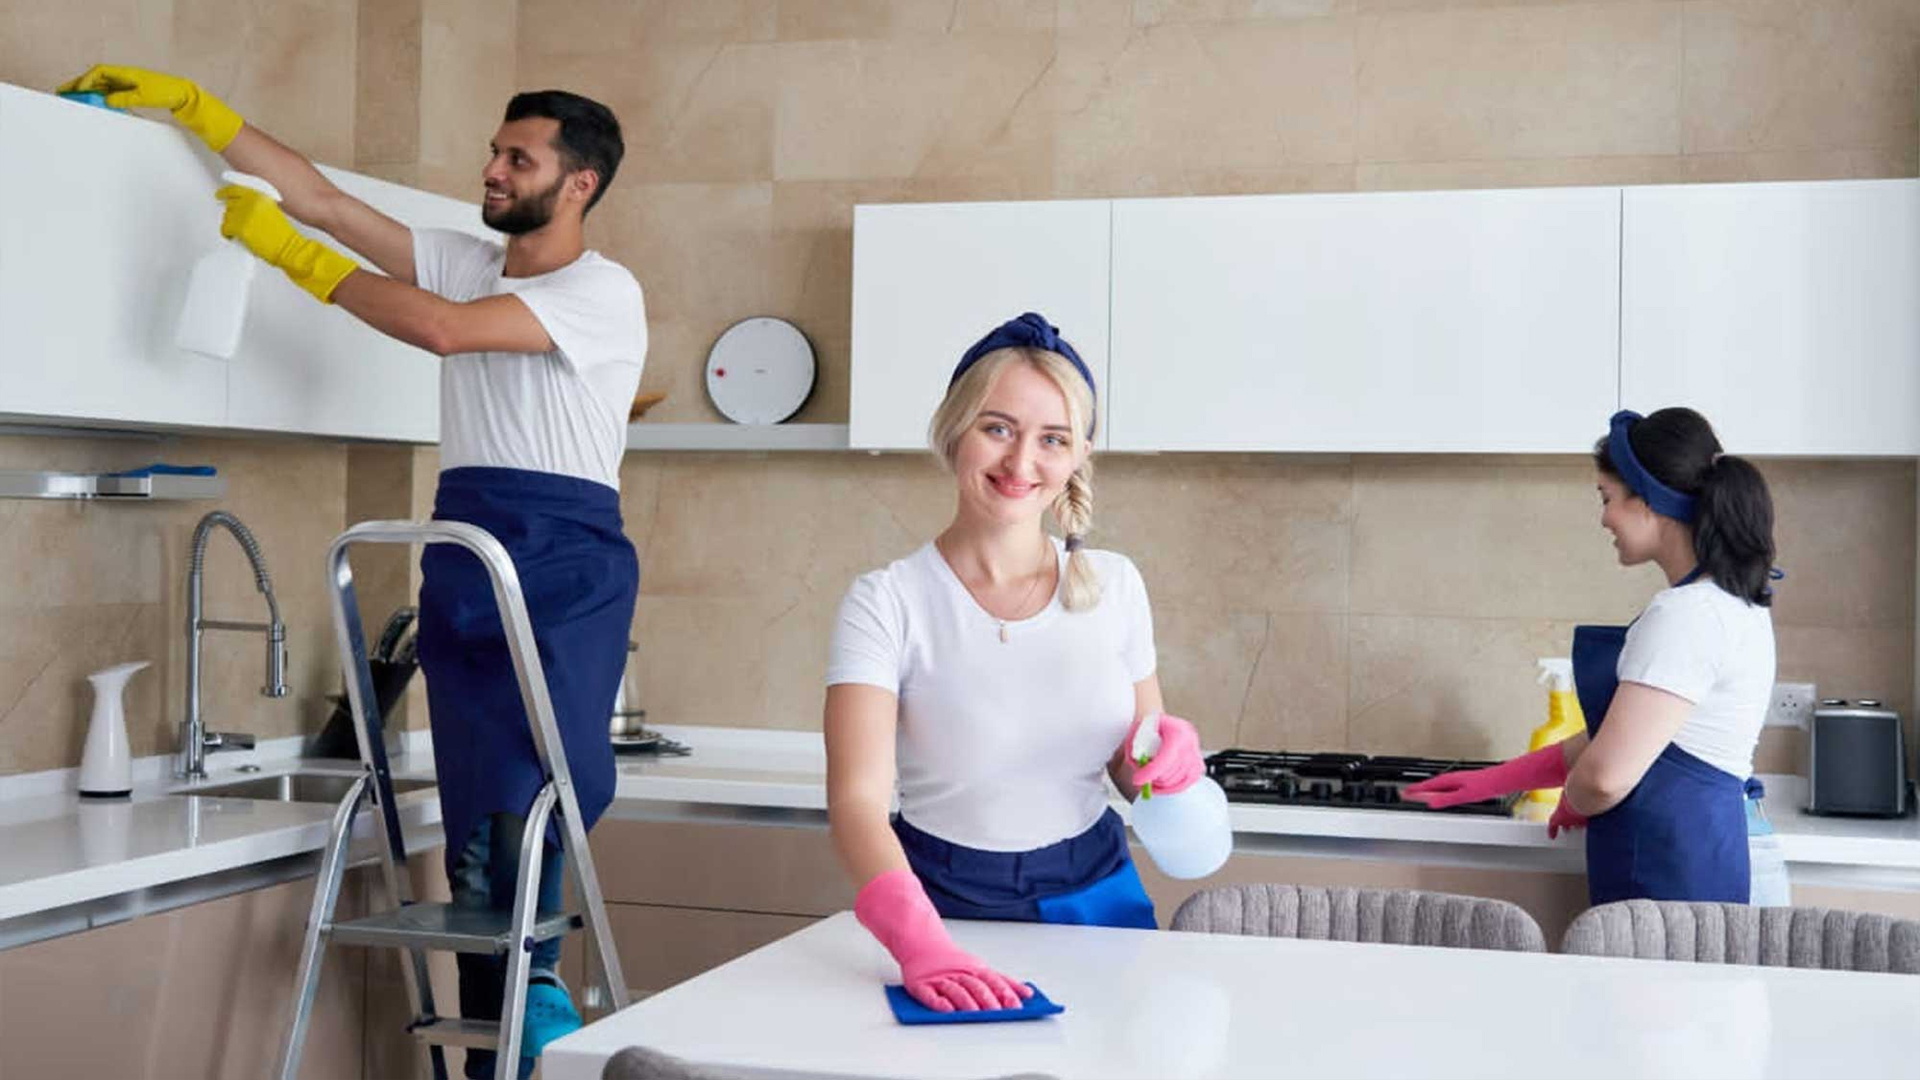 Bathroom Deep Cleaning Service in Vadapalani,Residential Cleaning Service in Anna Nagar,Kitchen Deep Cleaning in Nungambakkam,Carpet Cleaning Service in Kodambakkam